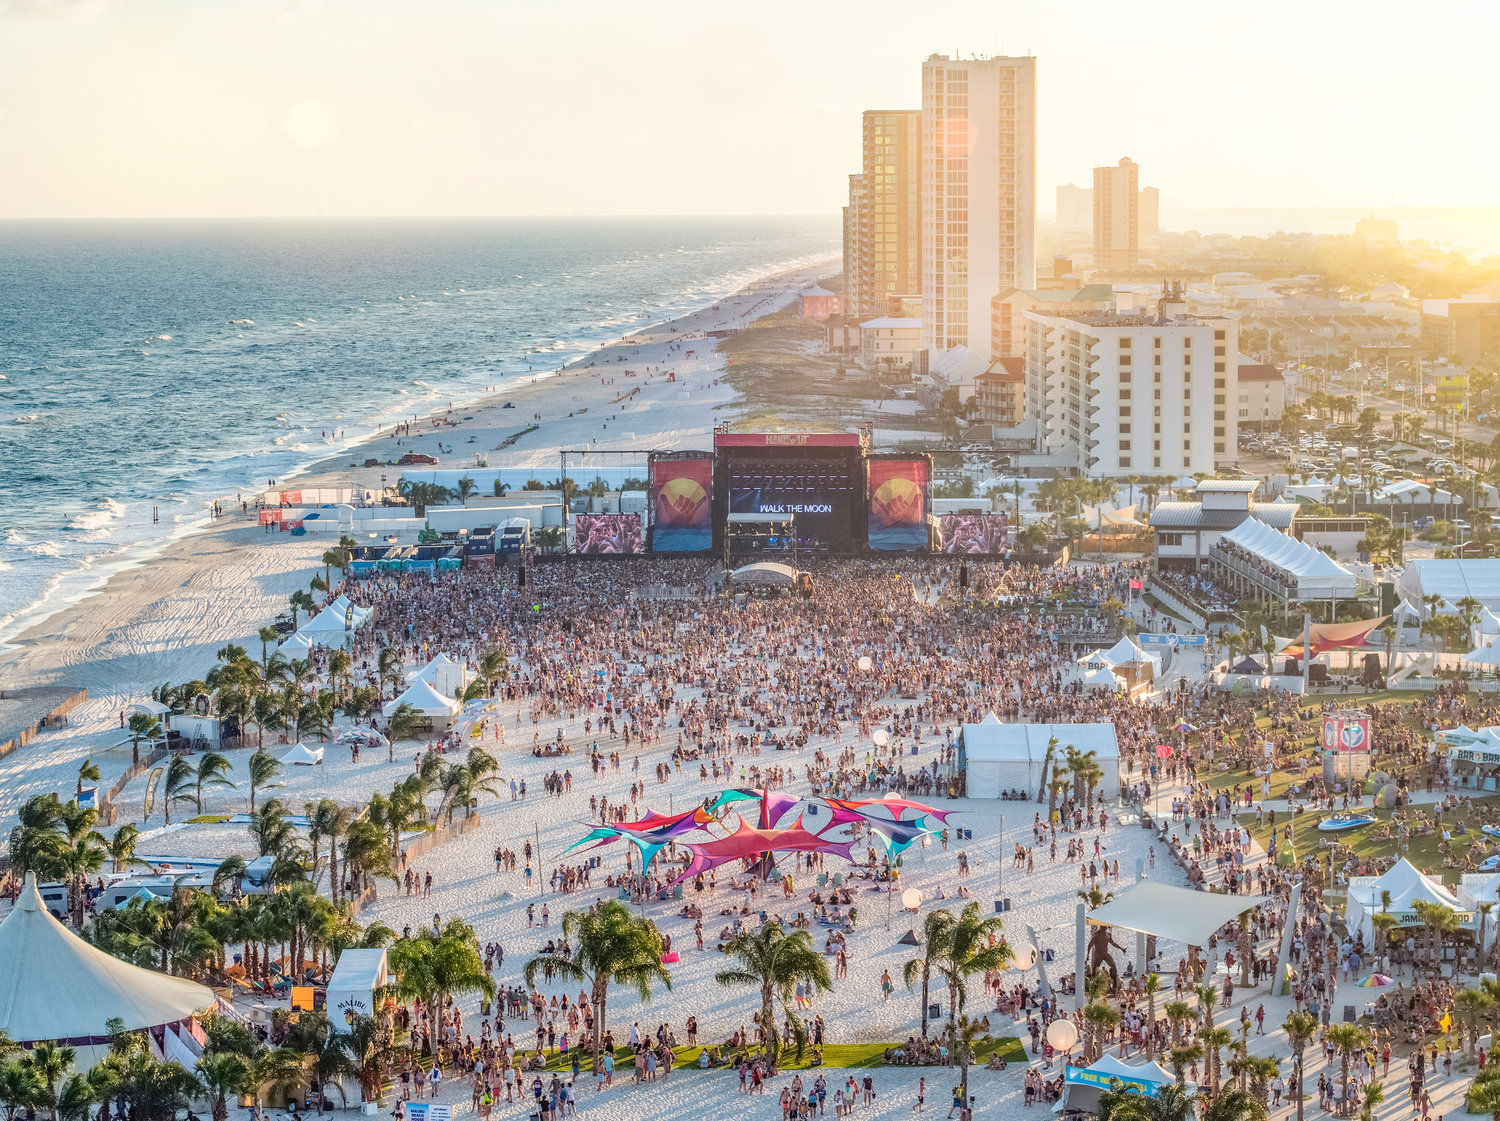 The Hangout Music Fest 2023 takes over the beaches of Gulf Shores May 19-21.